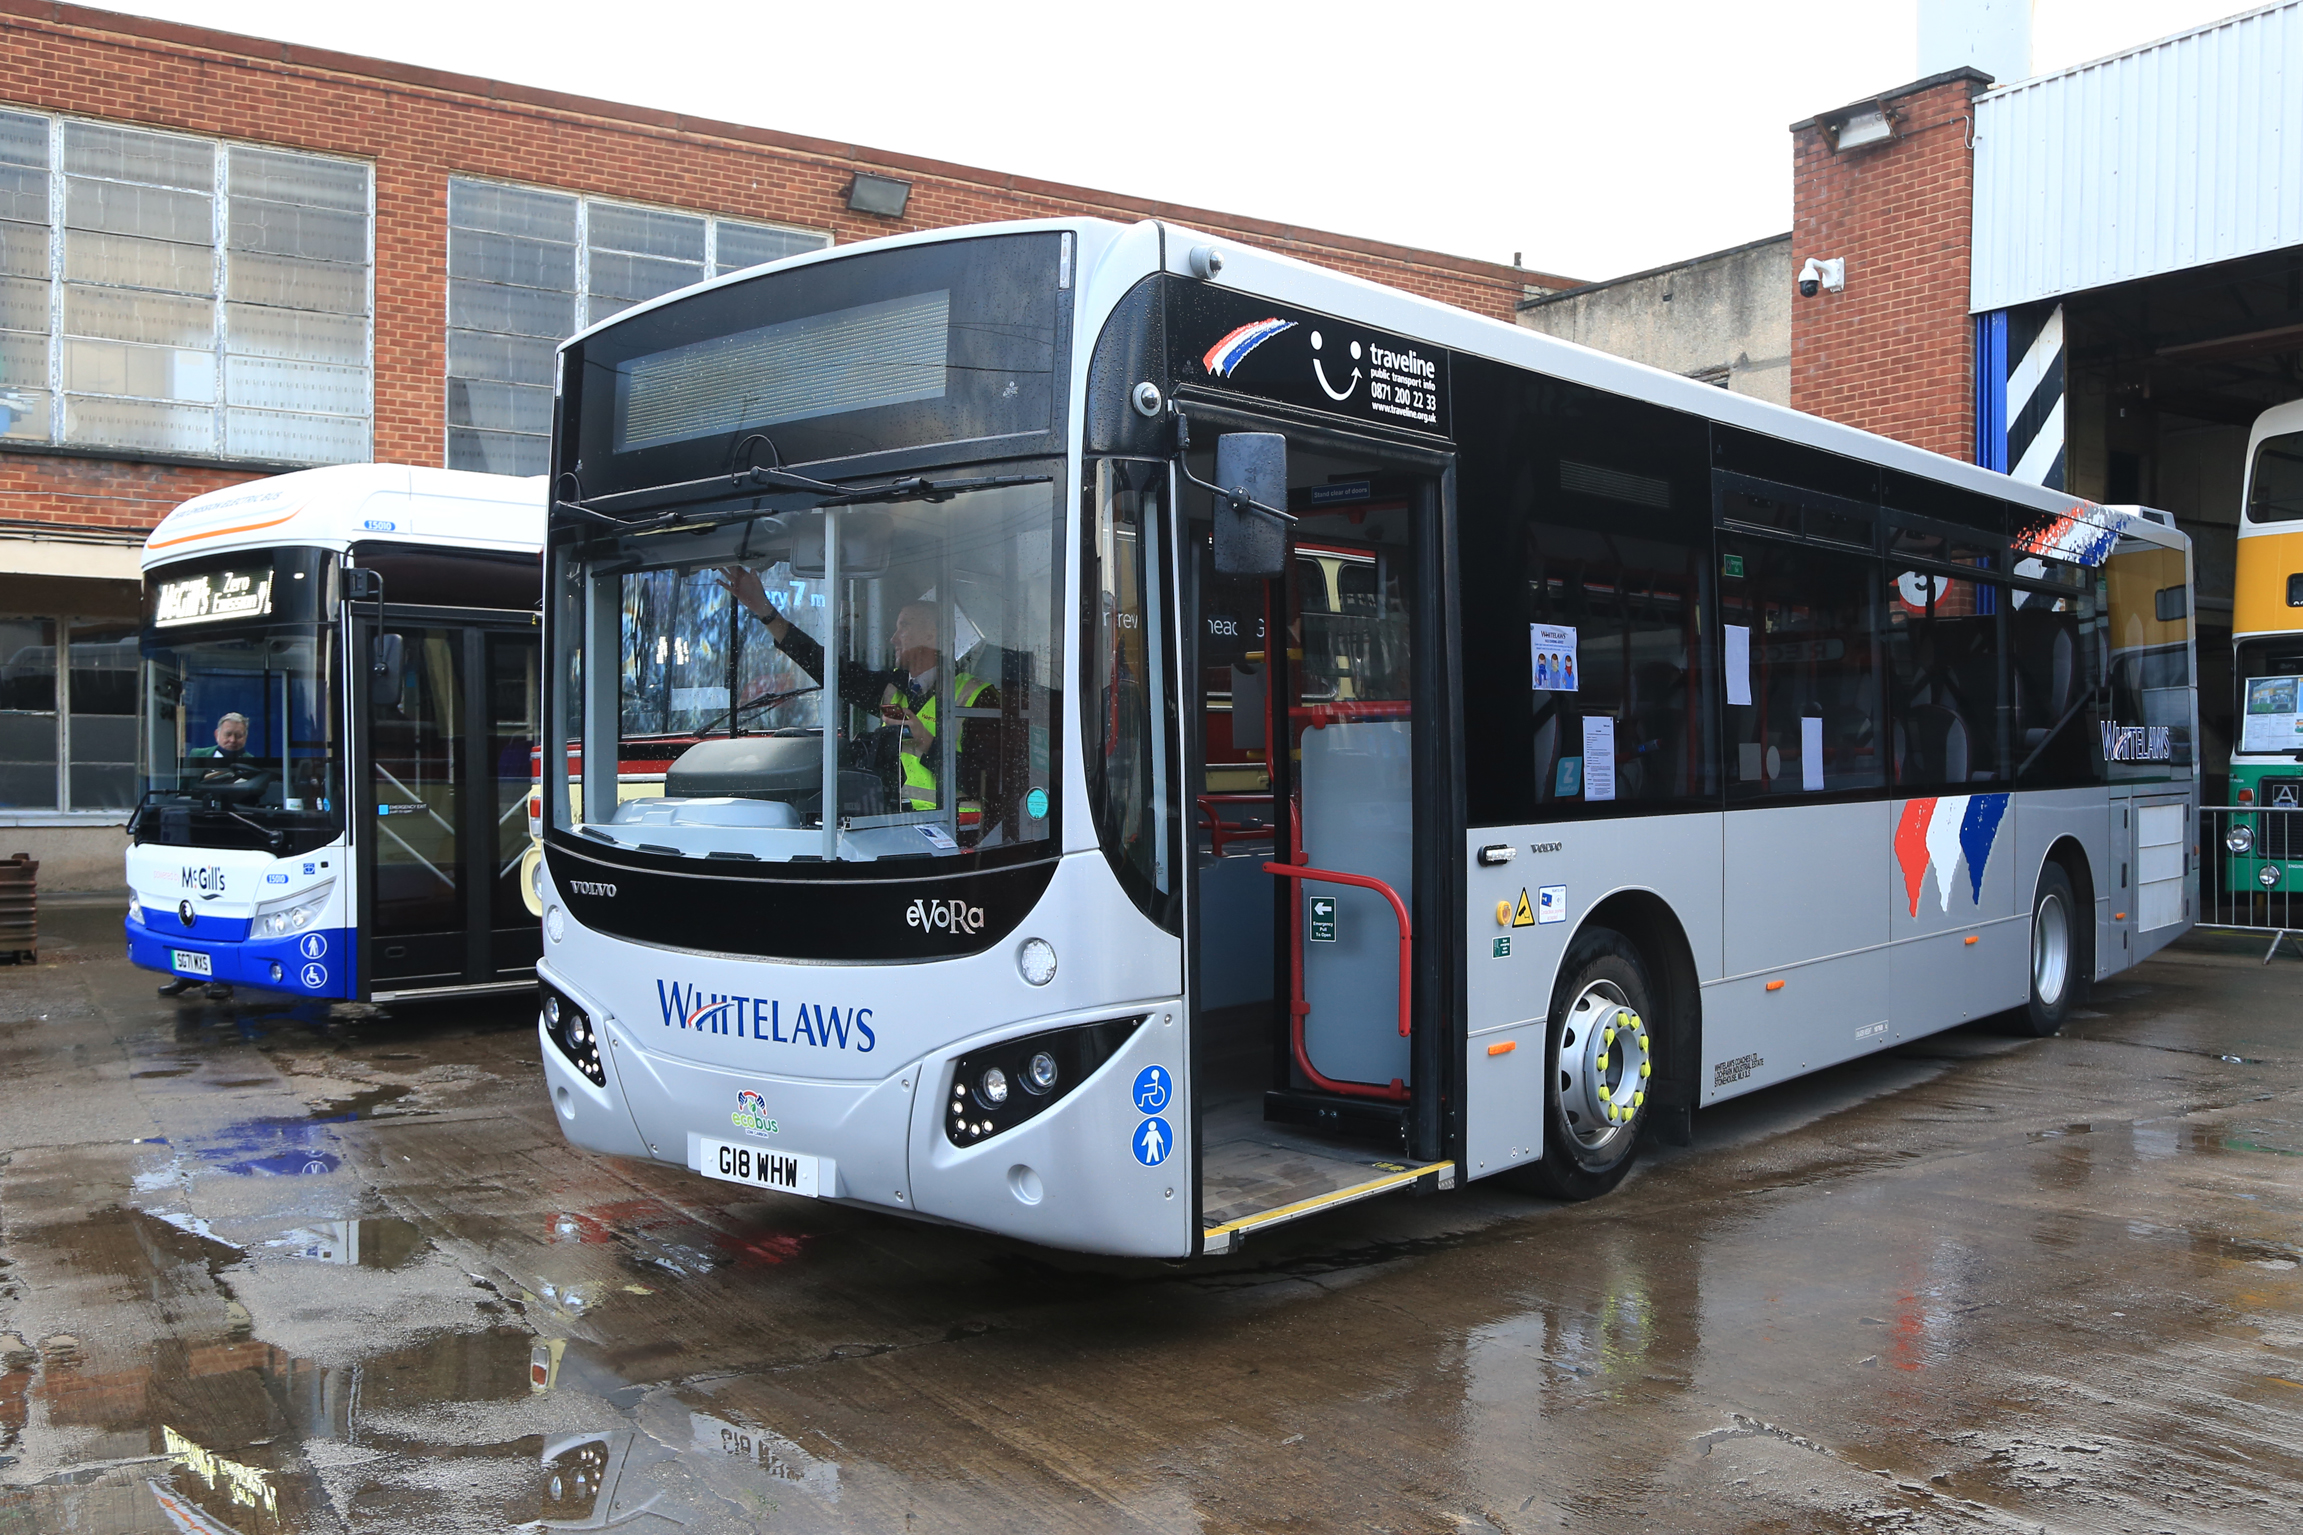 Whitelaws have upgraded half of their service bus fleet in 2021 with 12 short (10.8m) MCV Evo-Ra bodied Volvo B8RLEs. The 12th to be delivered is seen alongside one of McGill’s Yutong E12 electrics in Bridgeton’s visiting vehicle showcase area